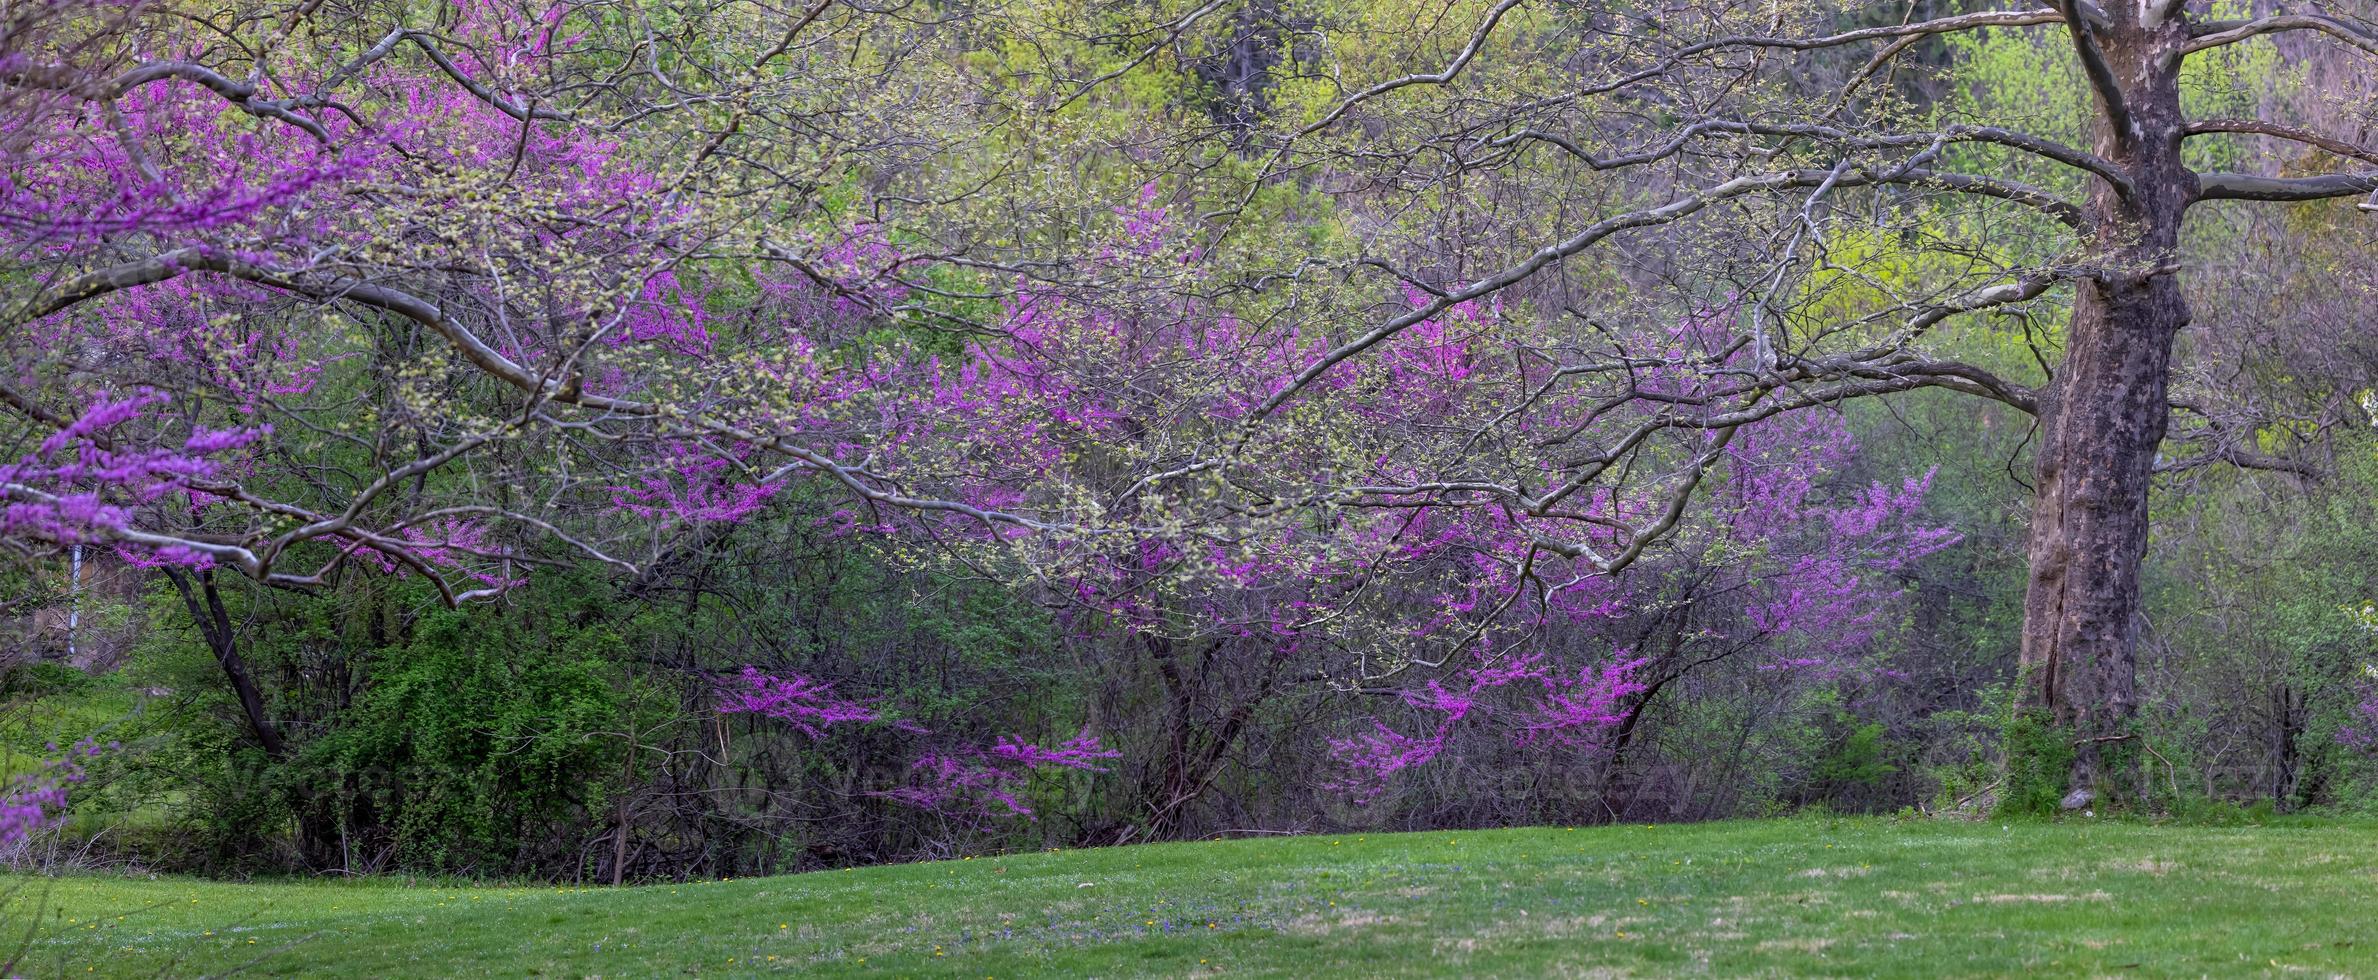 Panoramic view of Spring bloom on trees in Michigan countryside, selective focus photo